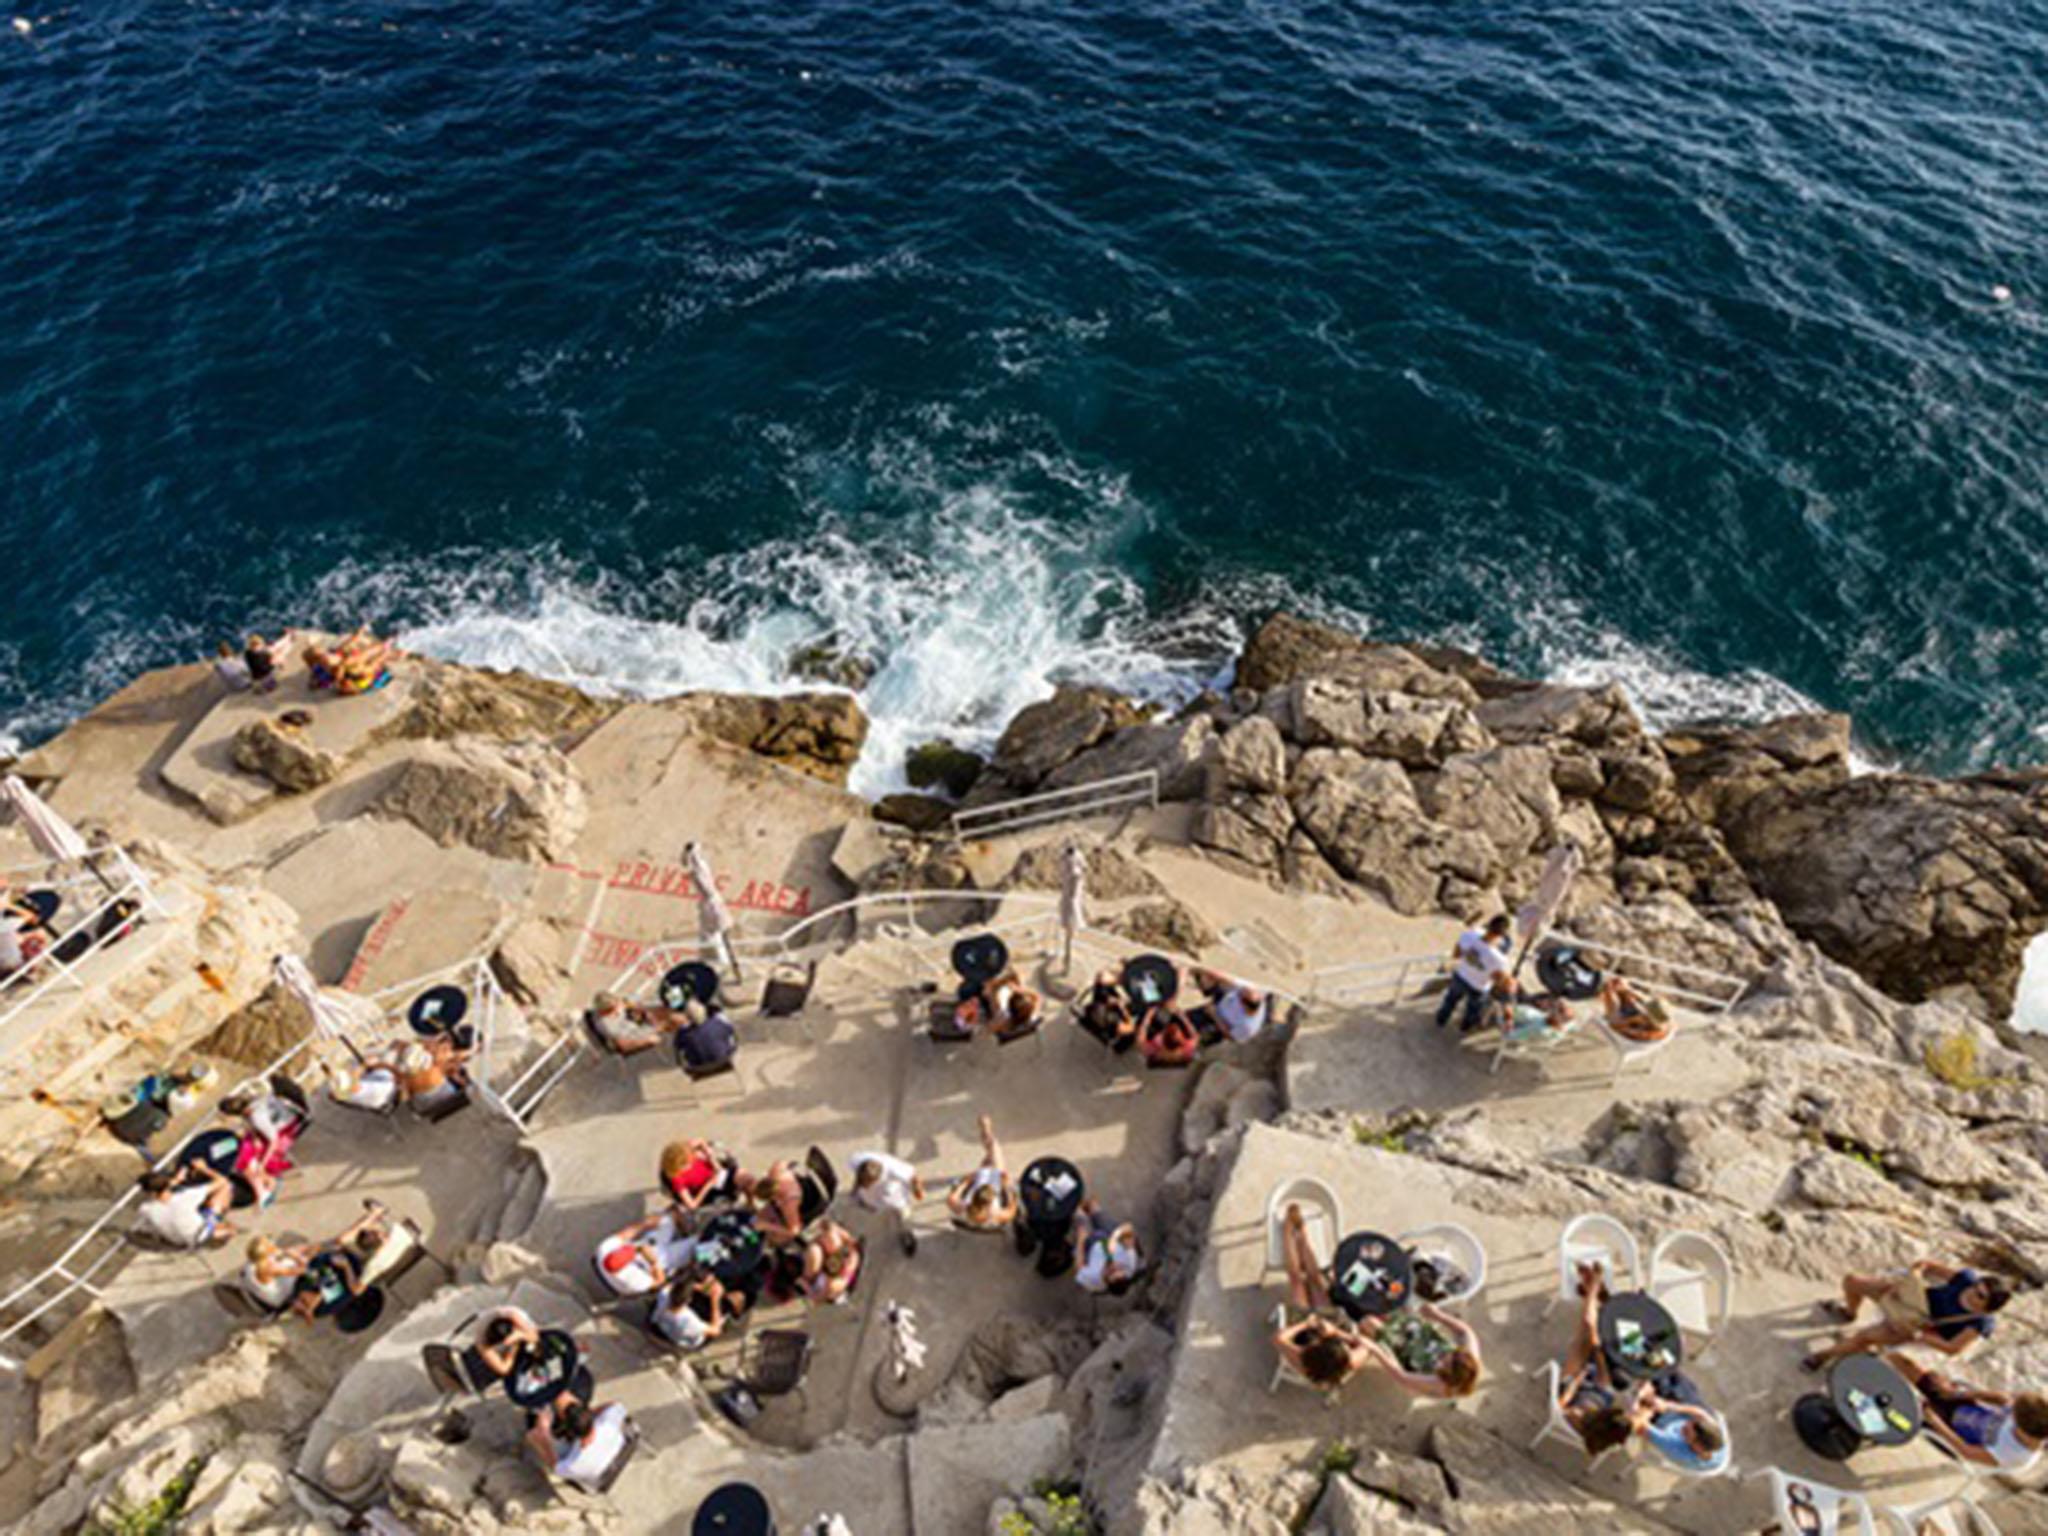 Buza Bar is one of Dubrovnik’s hottest spots and the perfect place to watch cliff-divers